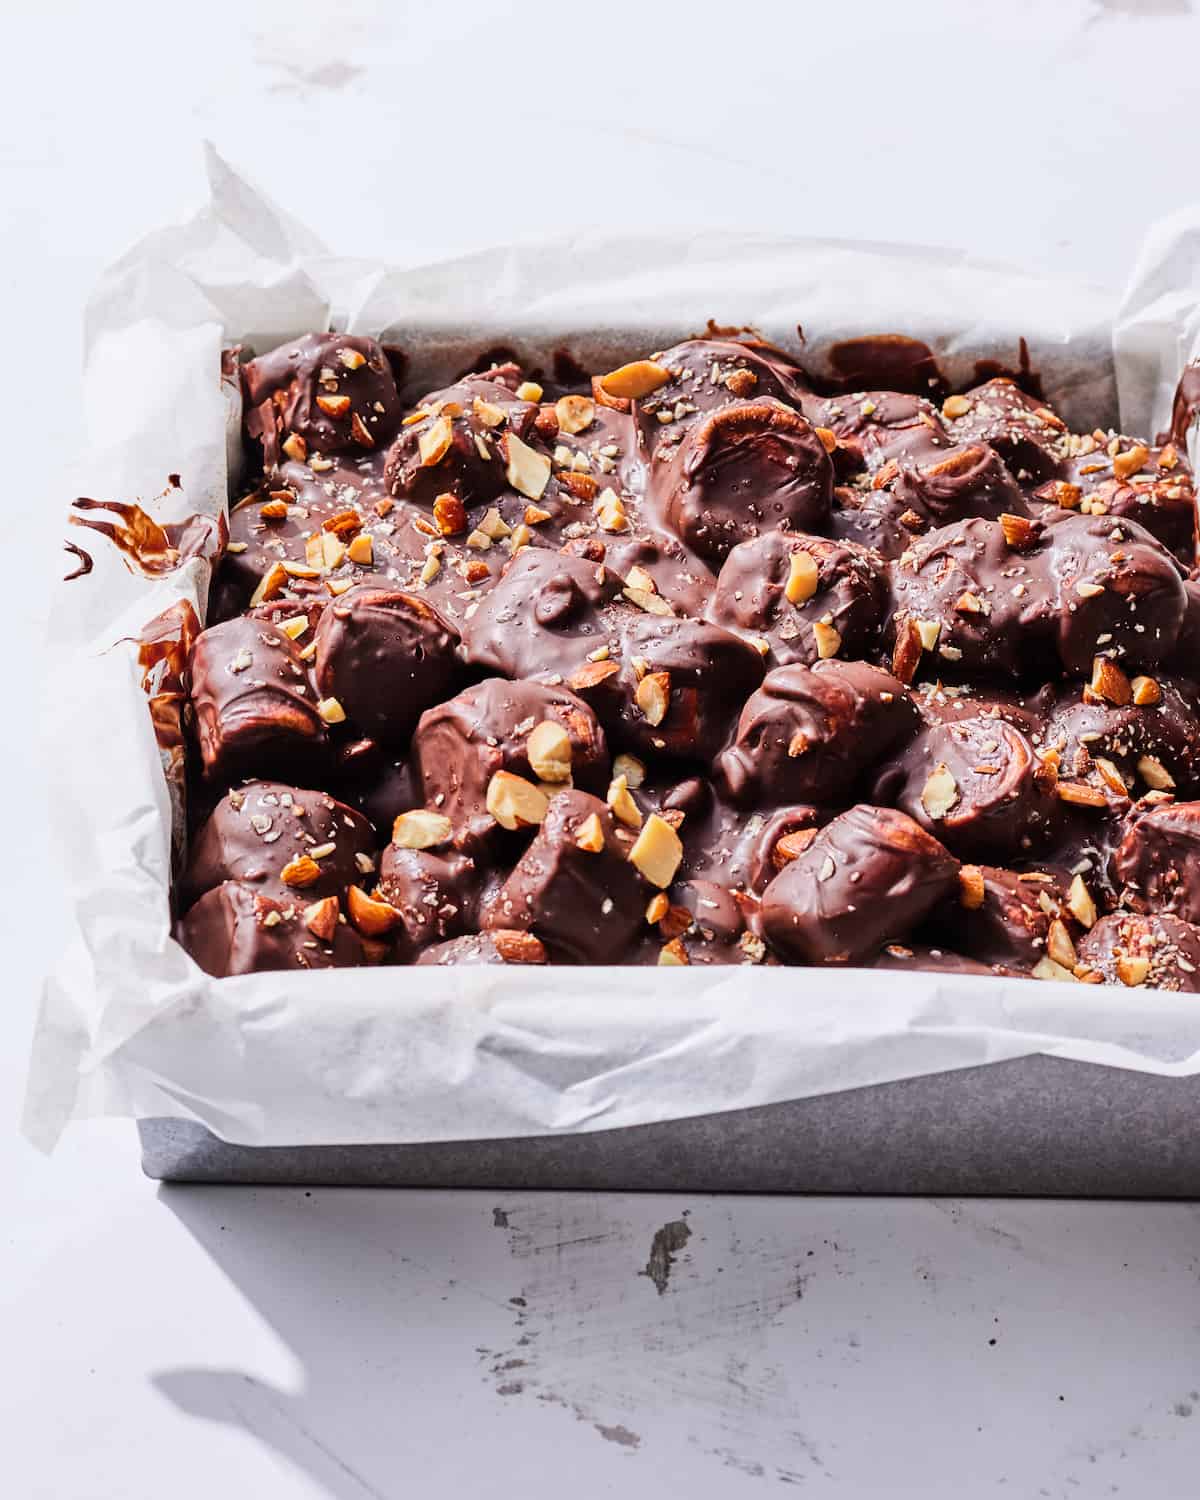 rocky road brownies in a 9x9 metal baking pan lined with parchment paper